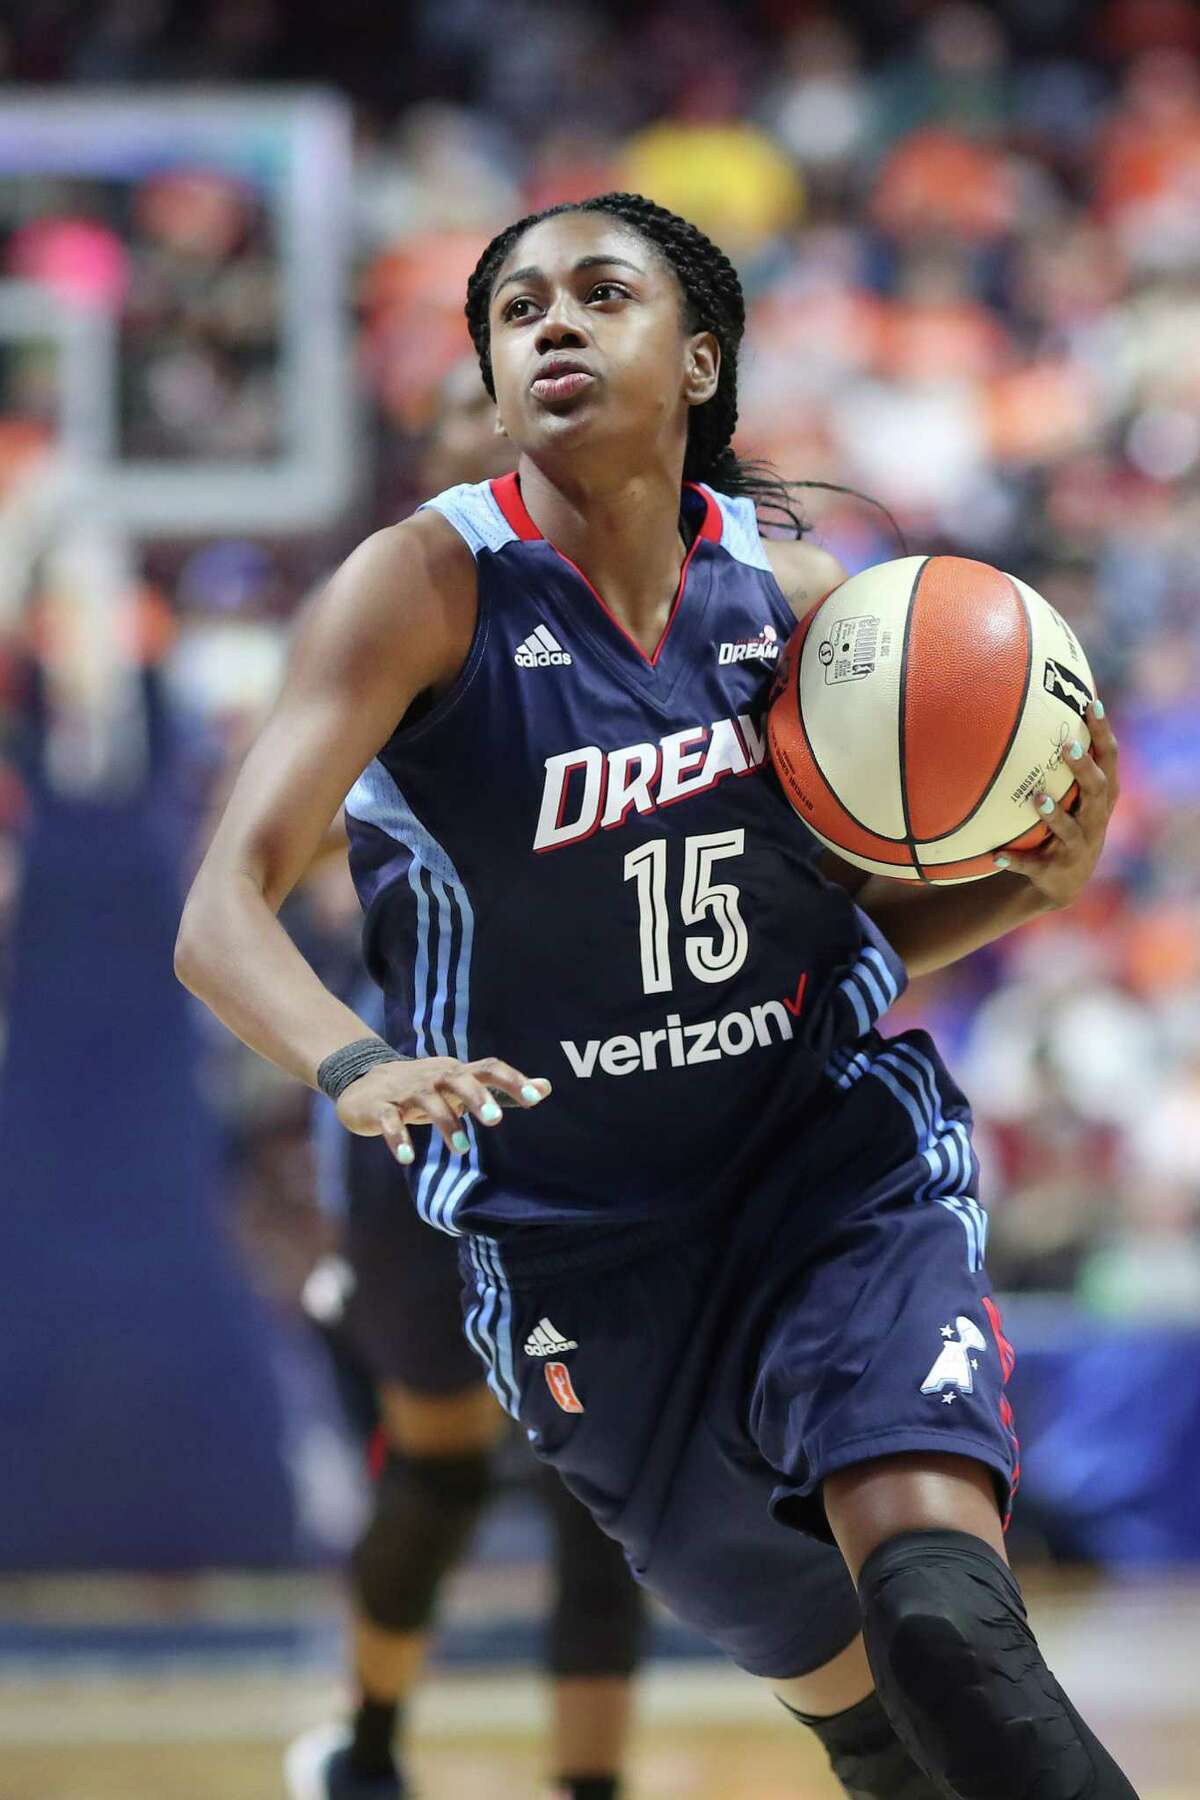 Atlanta Dream guard Tiffany Hayes during a 2017 game against the Connecticut Sun. The former UConn star hopes to advance the causes of social justice and racial equality while she sits out the WNBA season.